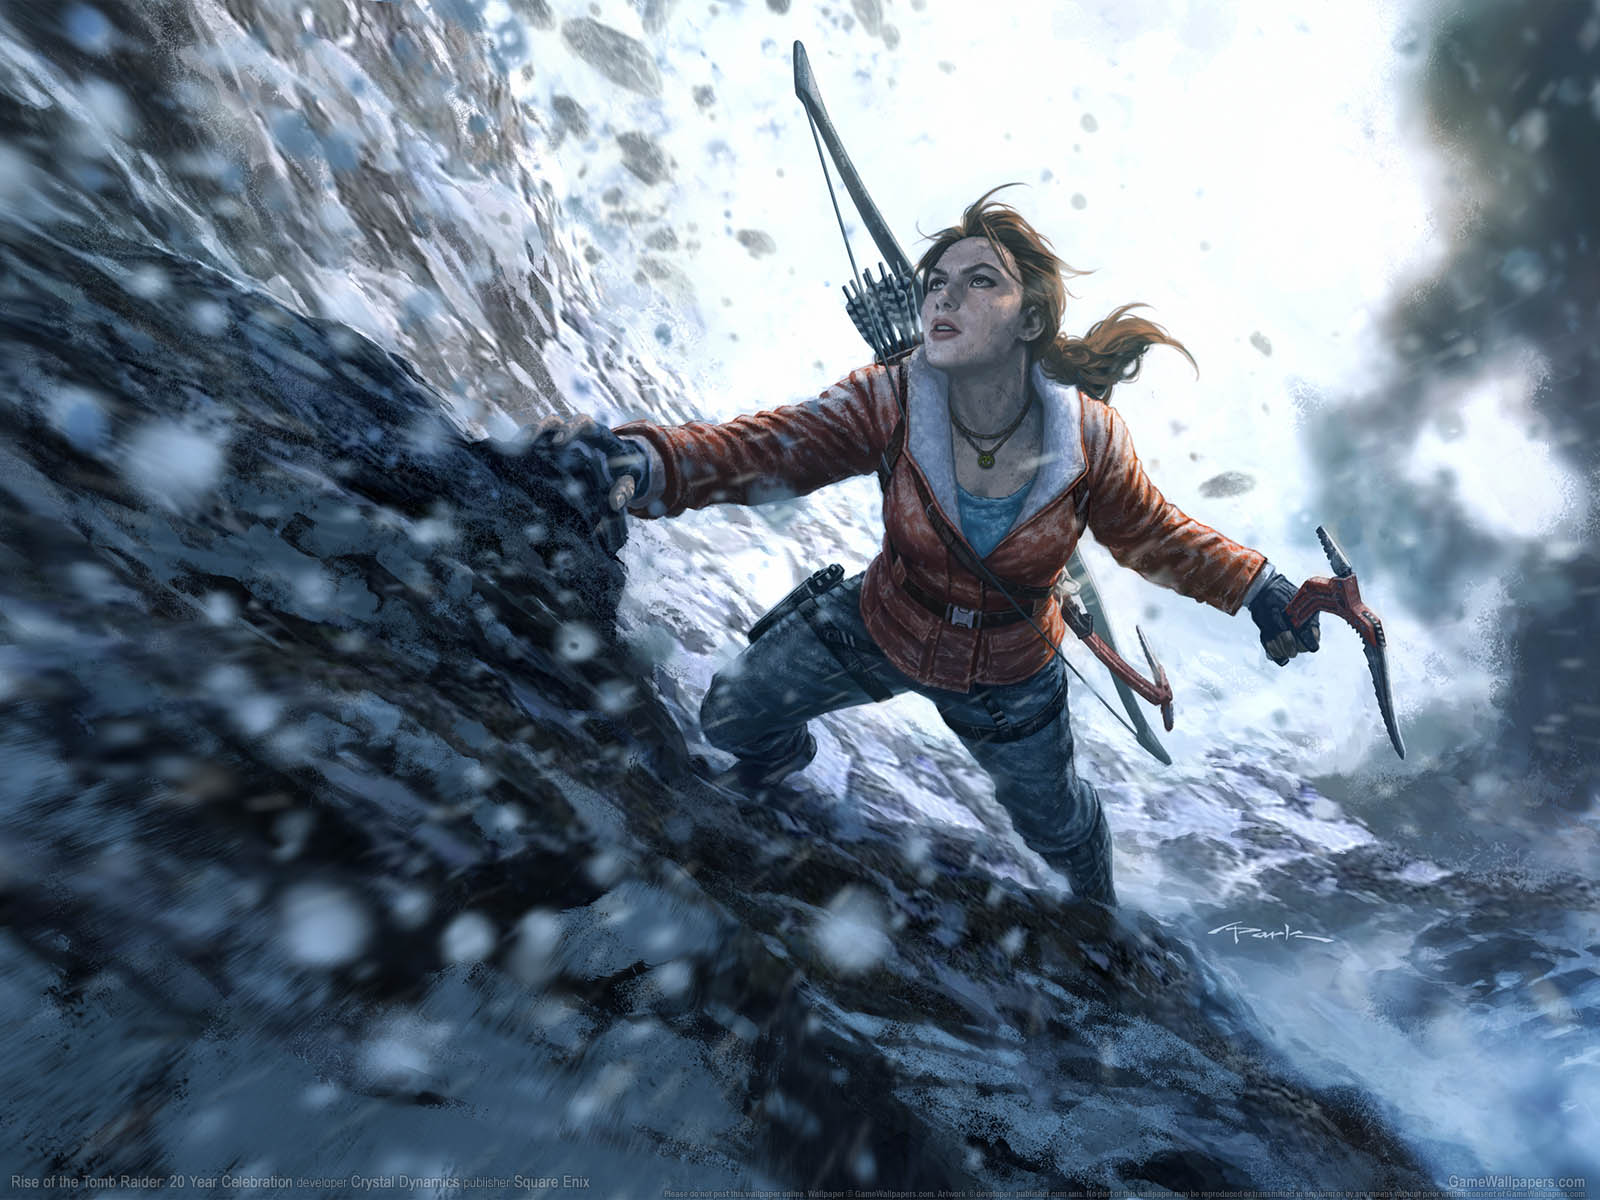 Rise of the Tomb Raider%25253A 20 Year Celebration achtergrond 02 1600x1200